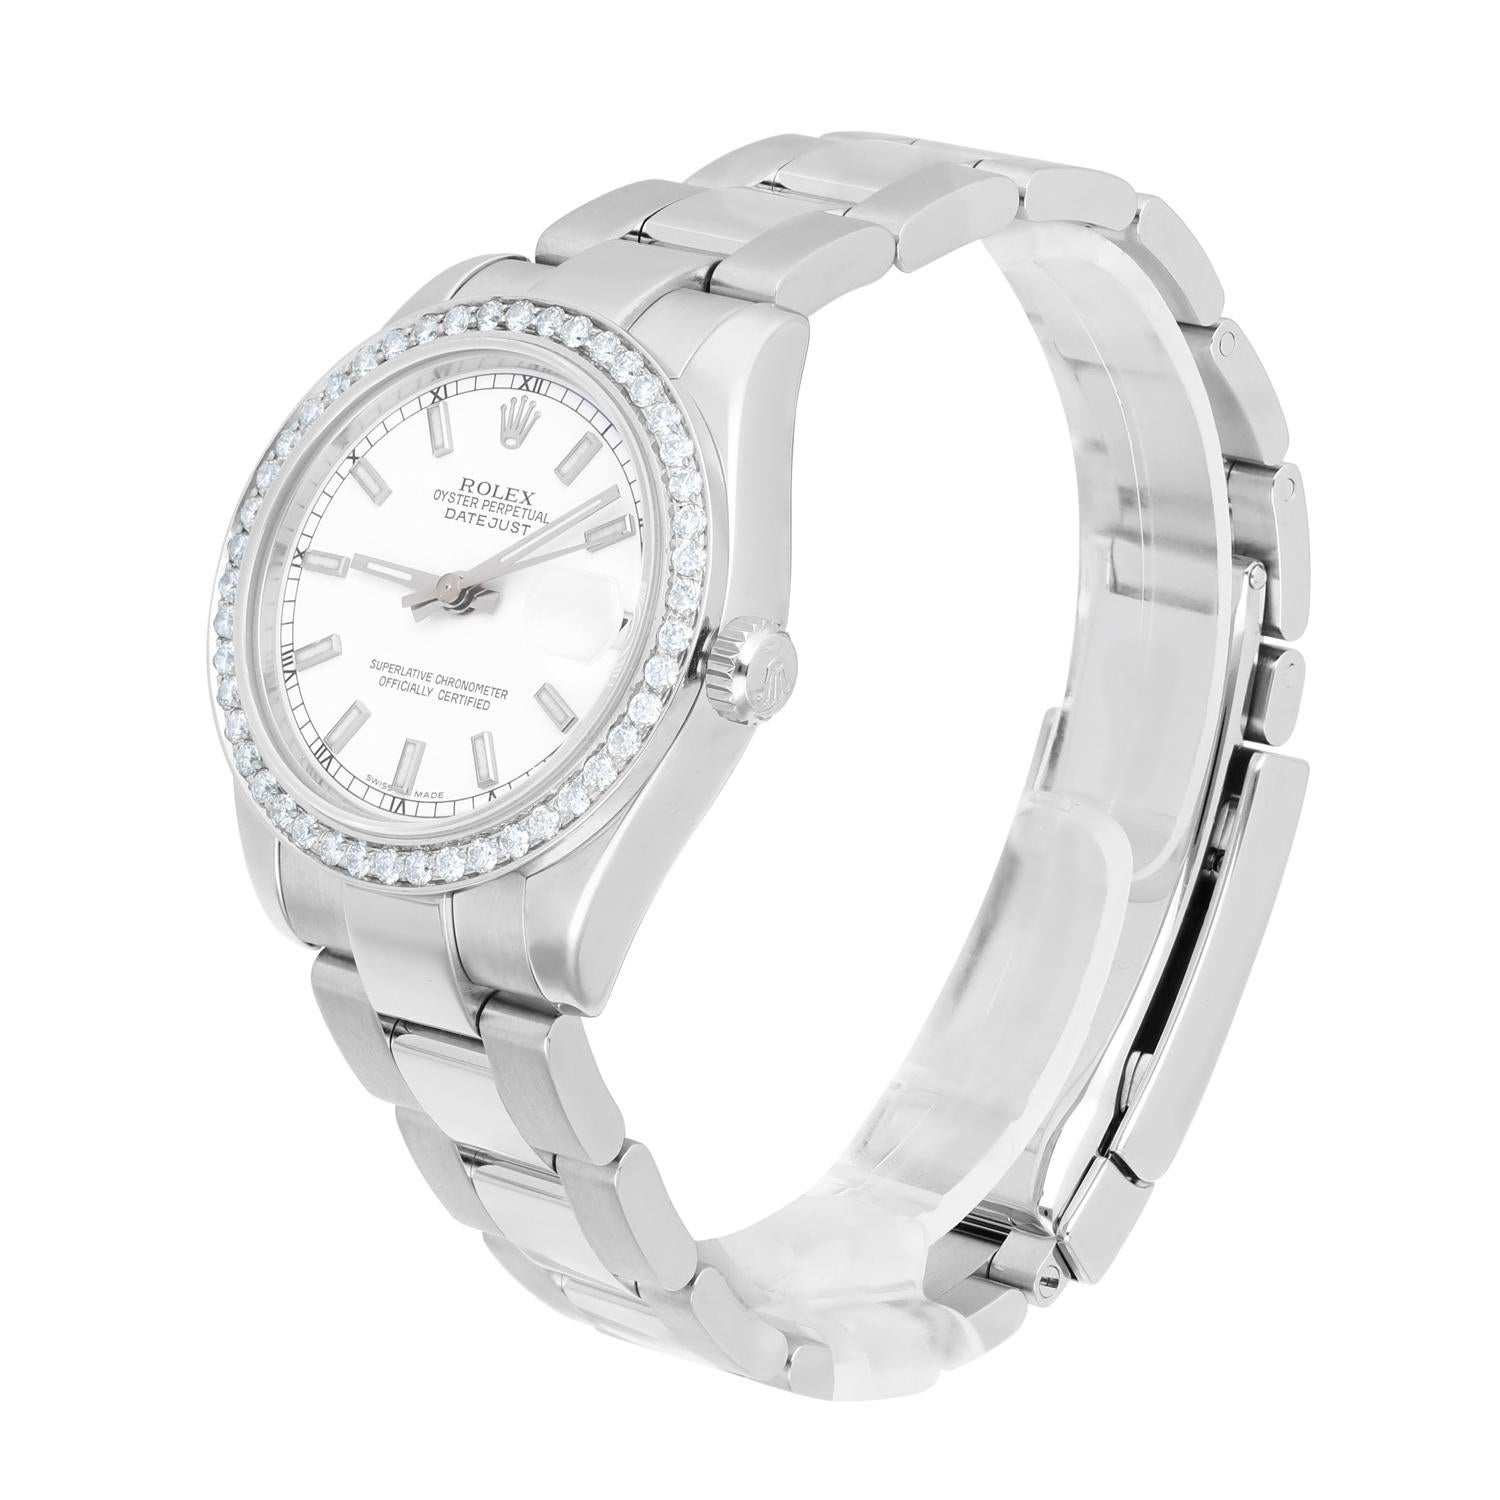 Rolex Datejust 31 Stainless Steel White Dial with Diamond Bezel Watch 178240 For Sale 1